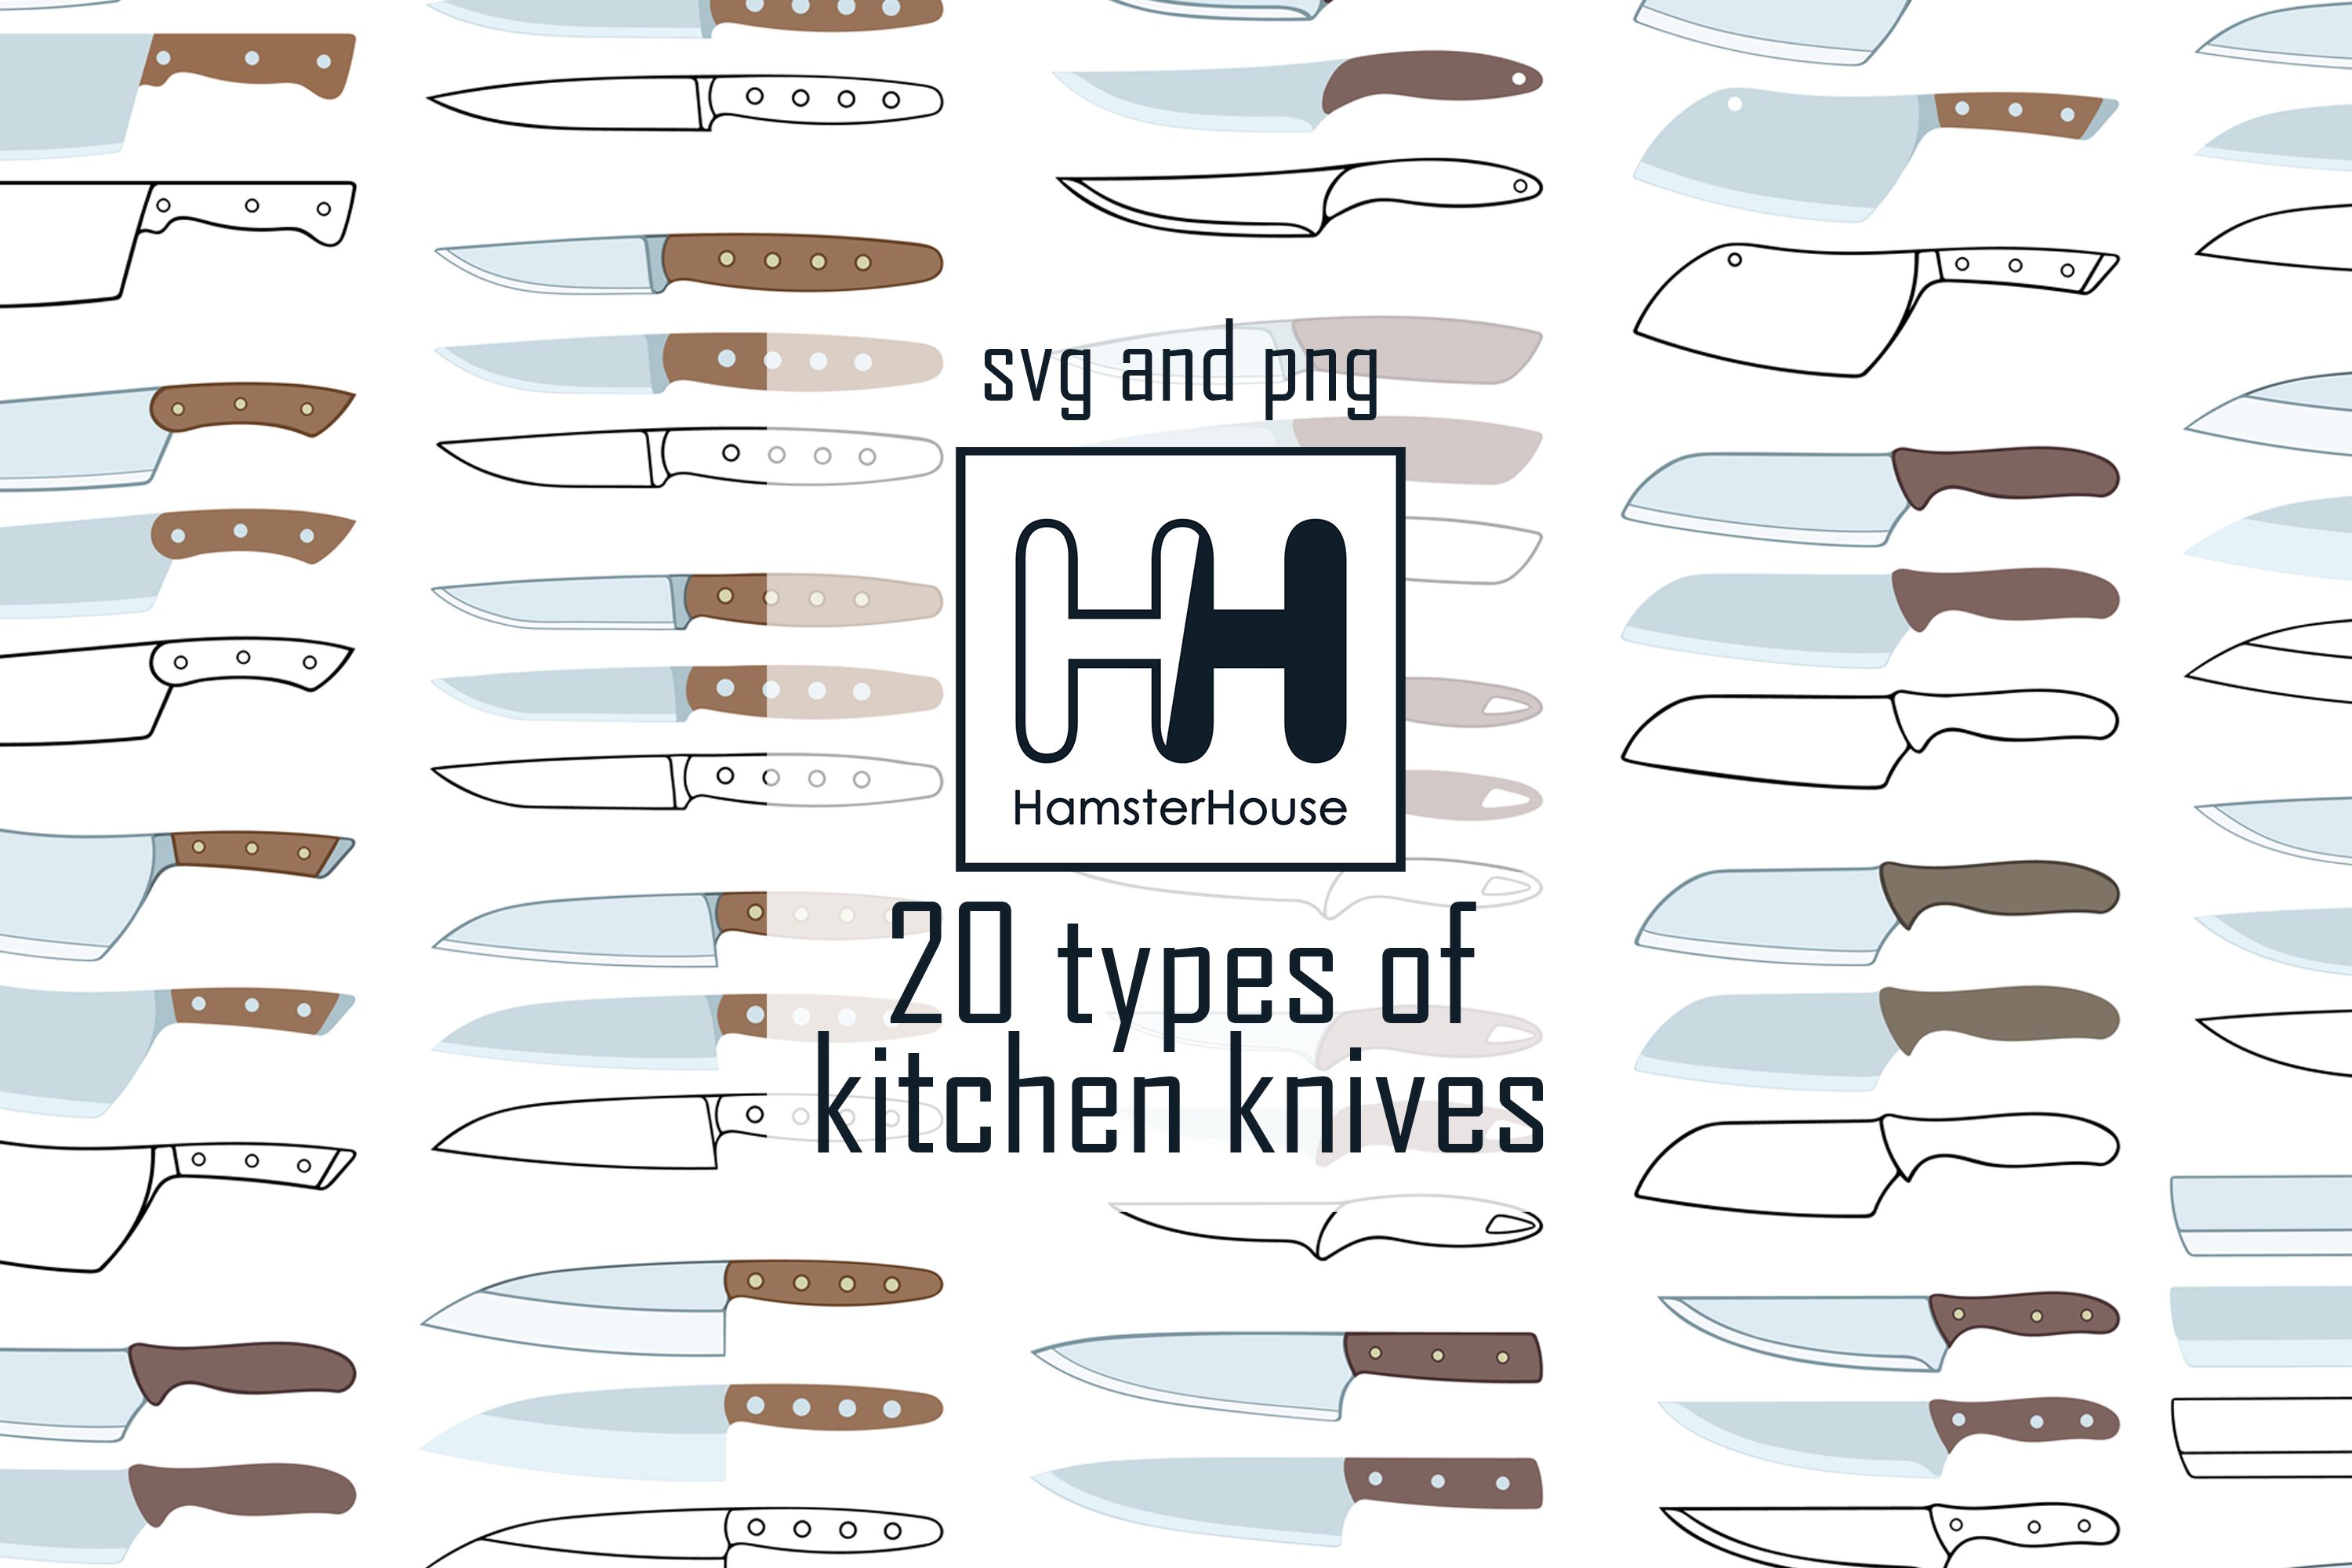 20 types of kitchen knives cover image.